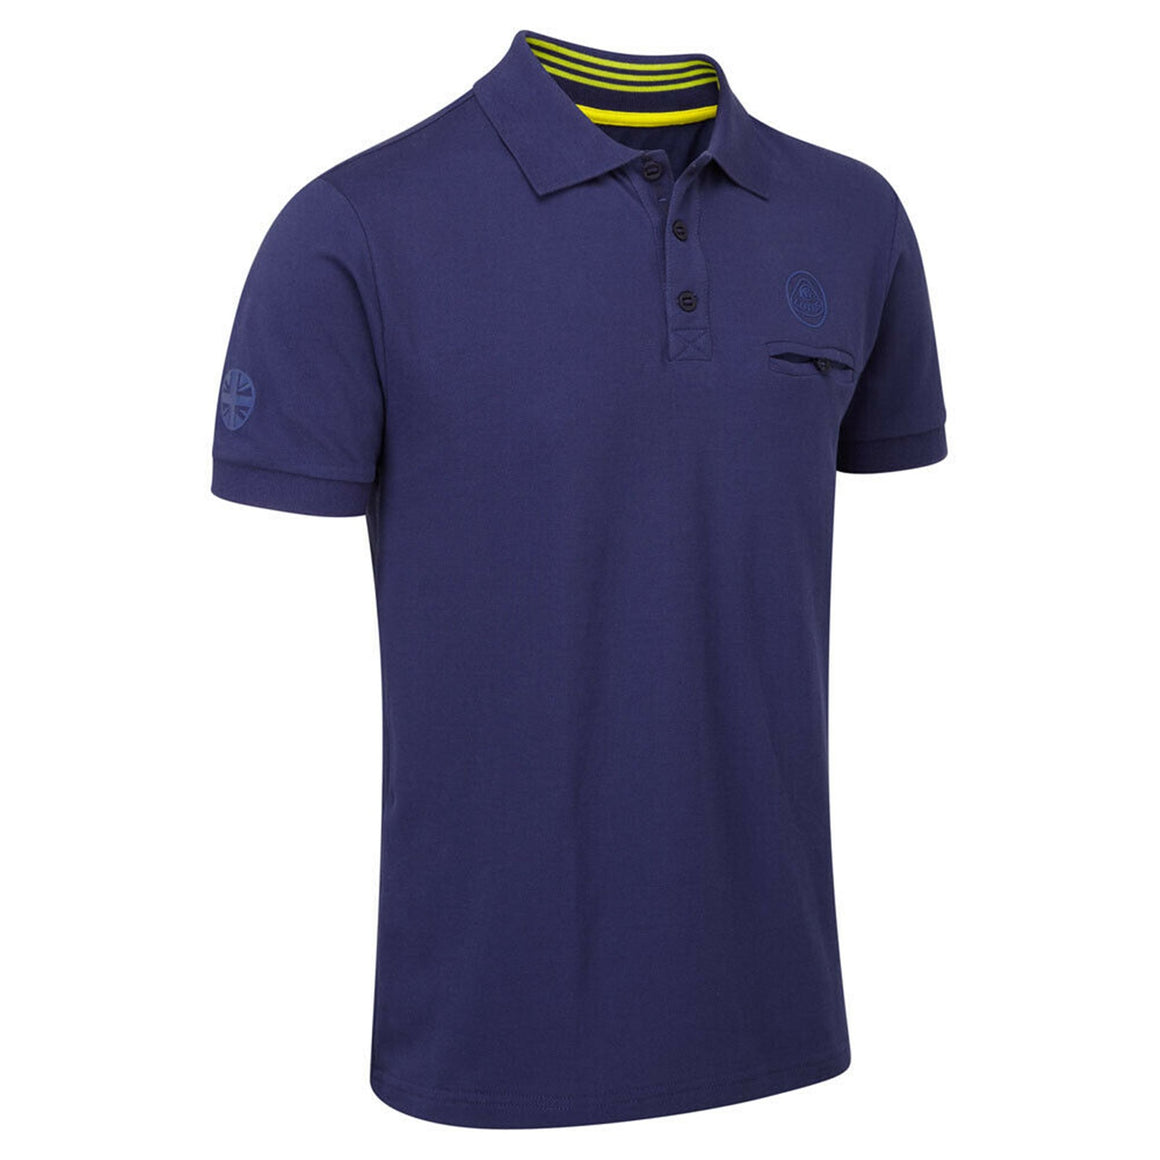 Lotus Cars Male Adult Polo Shirt - BLUE - Official Lotus Merchandise ...